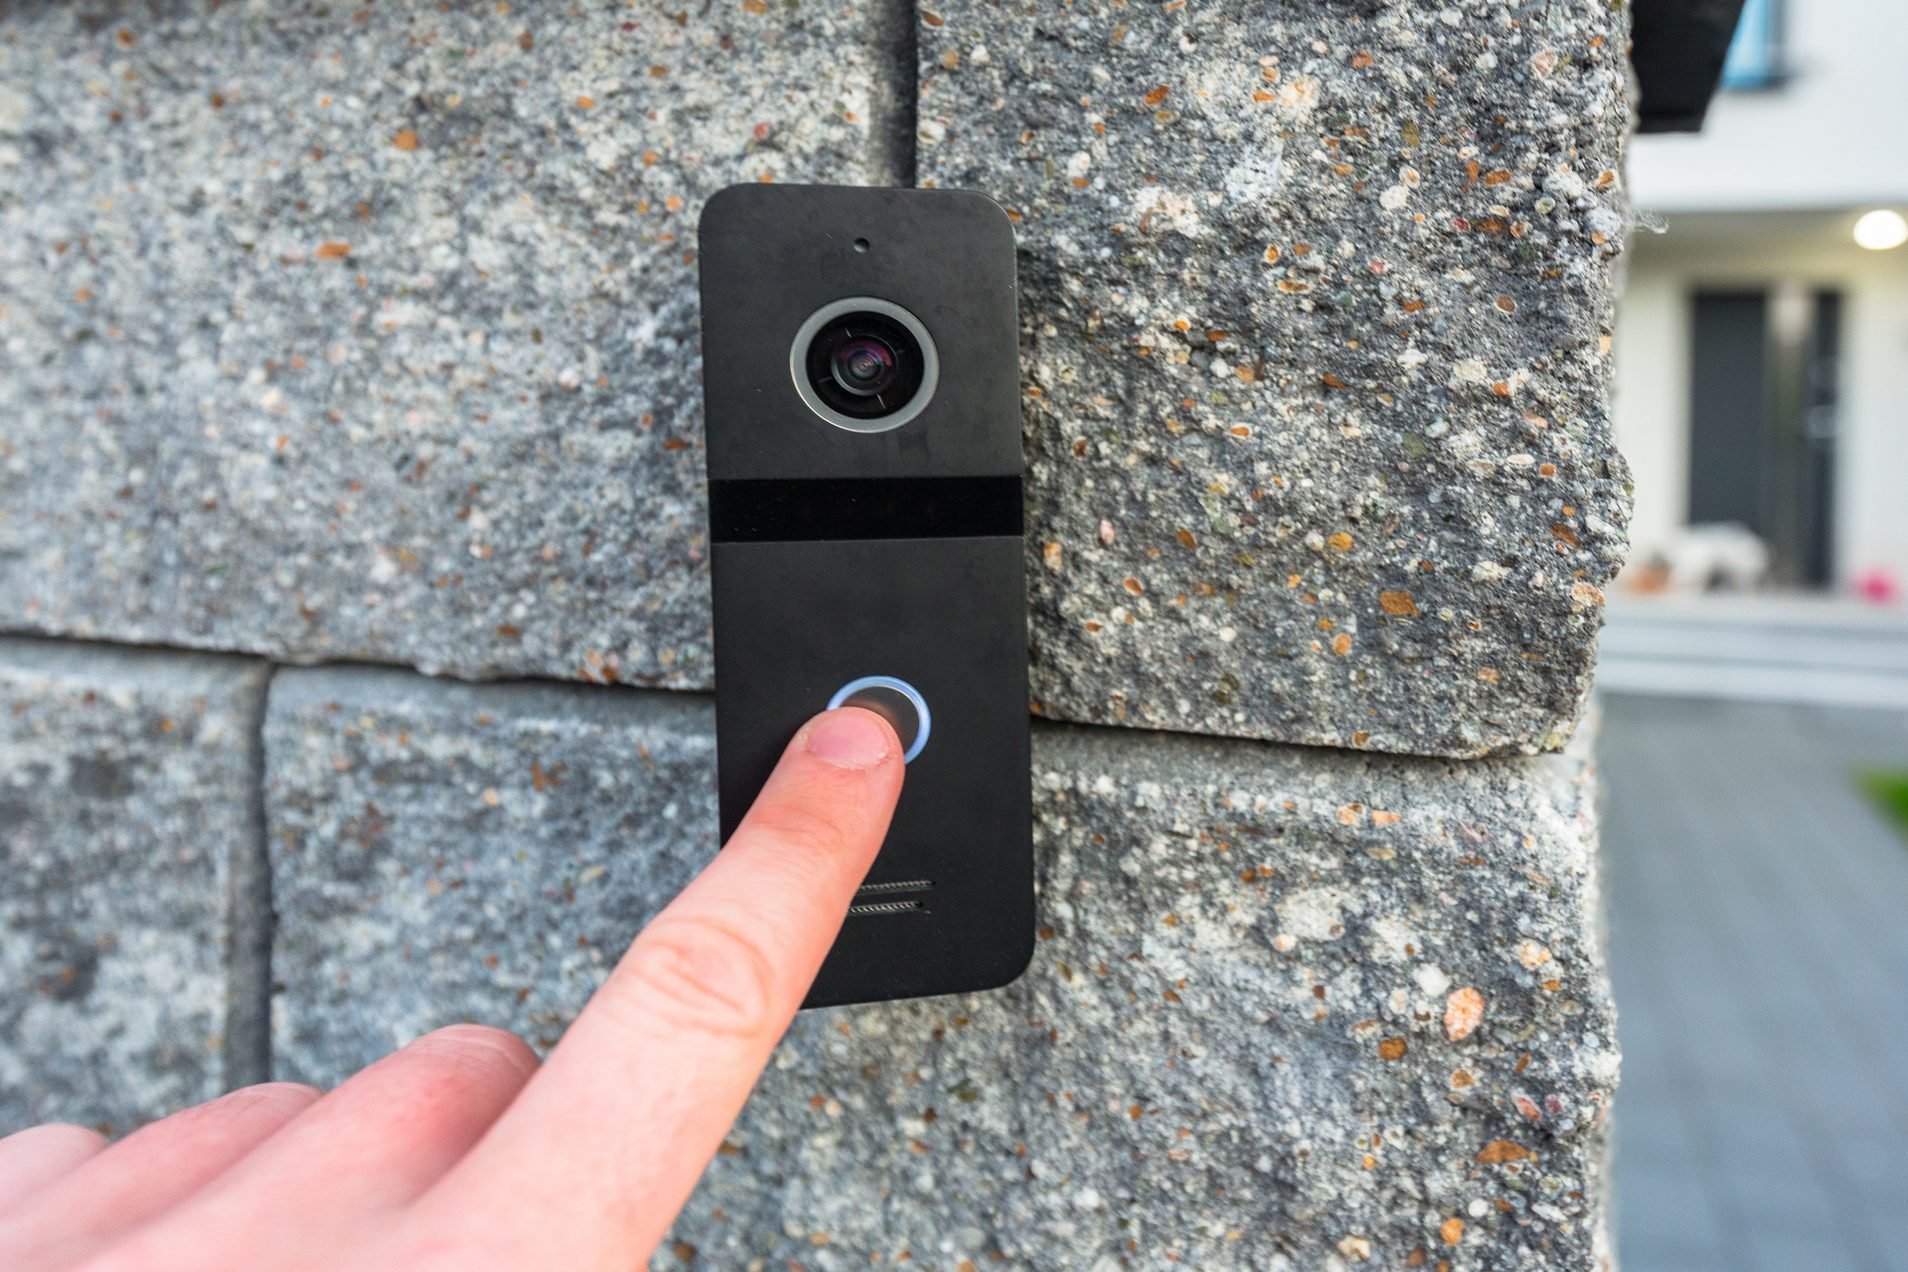 Your video doorbell does more than watch your front yard - 3 secret tips